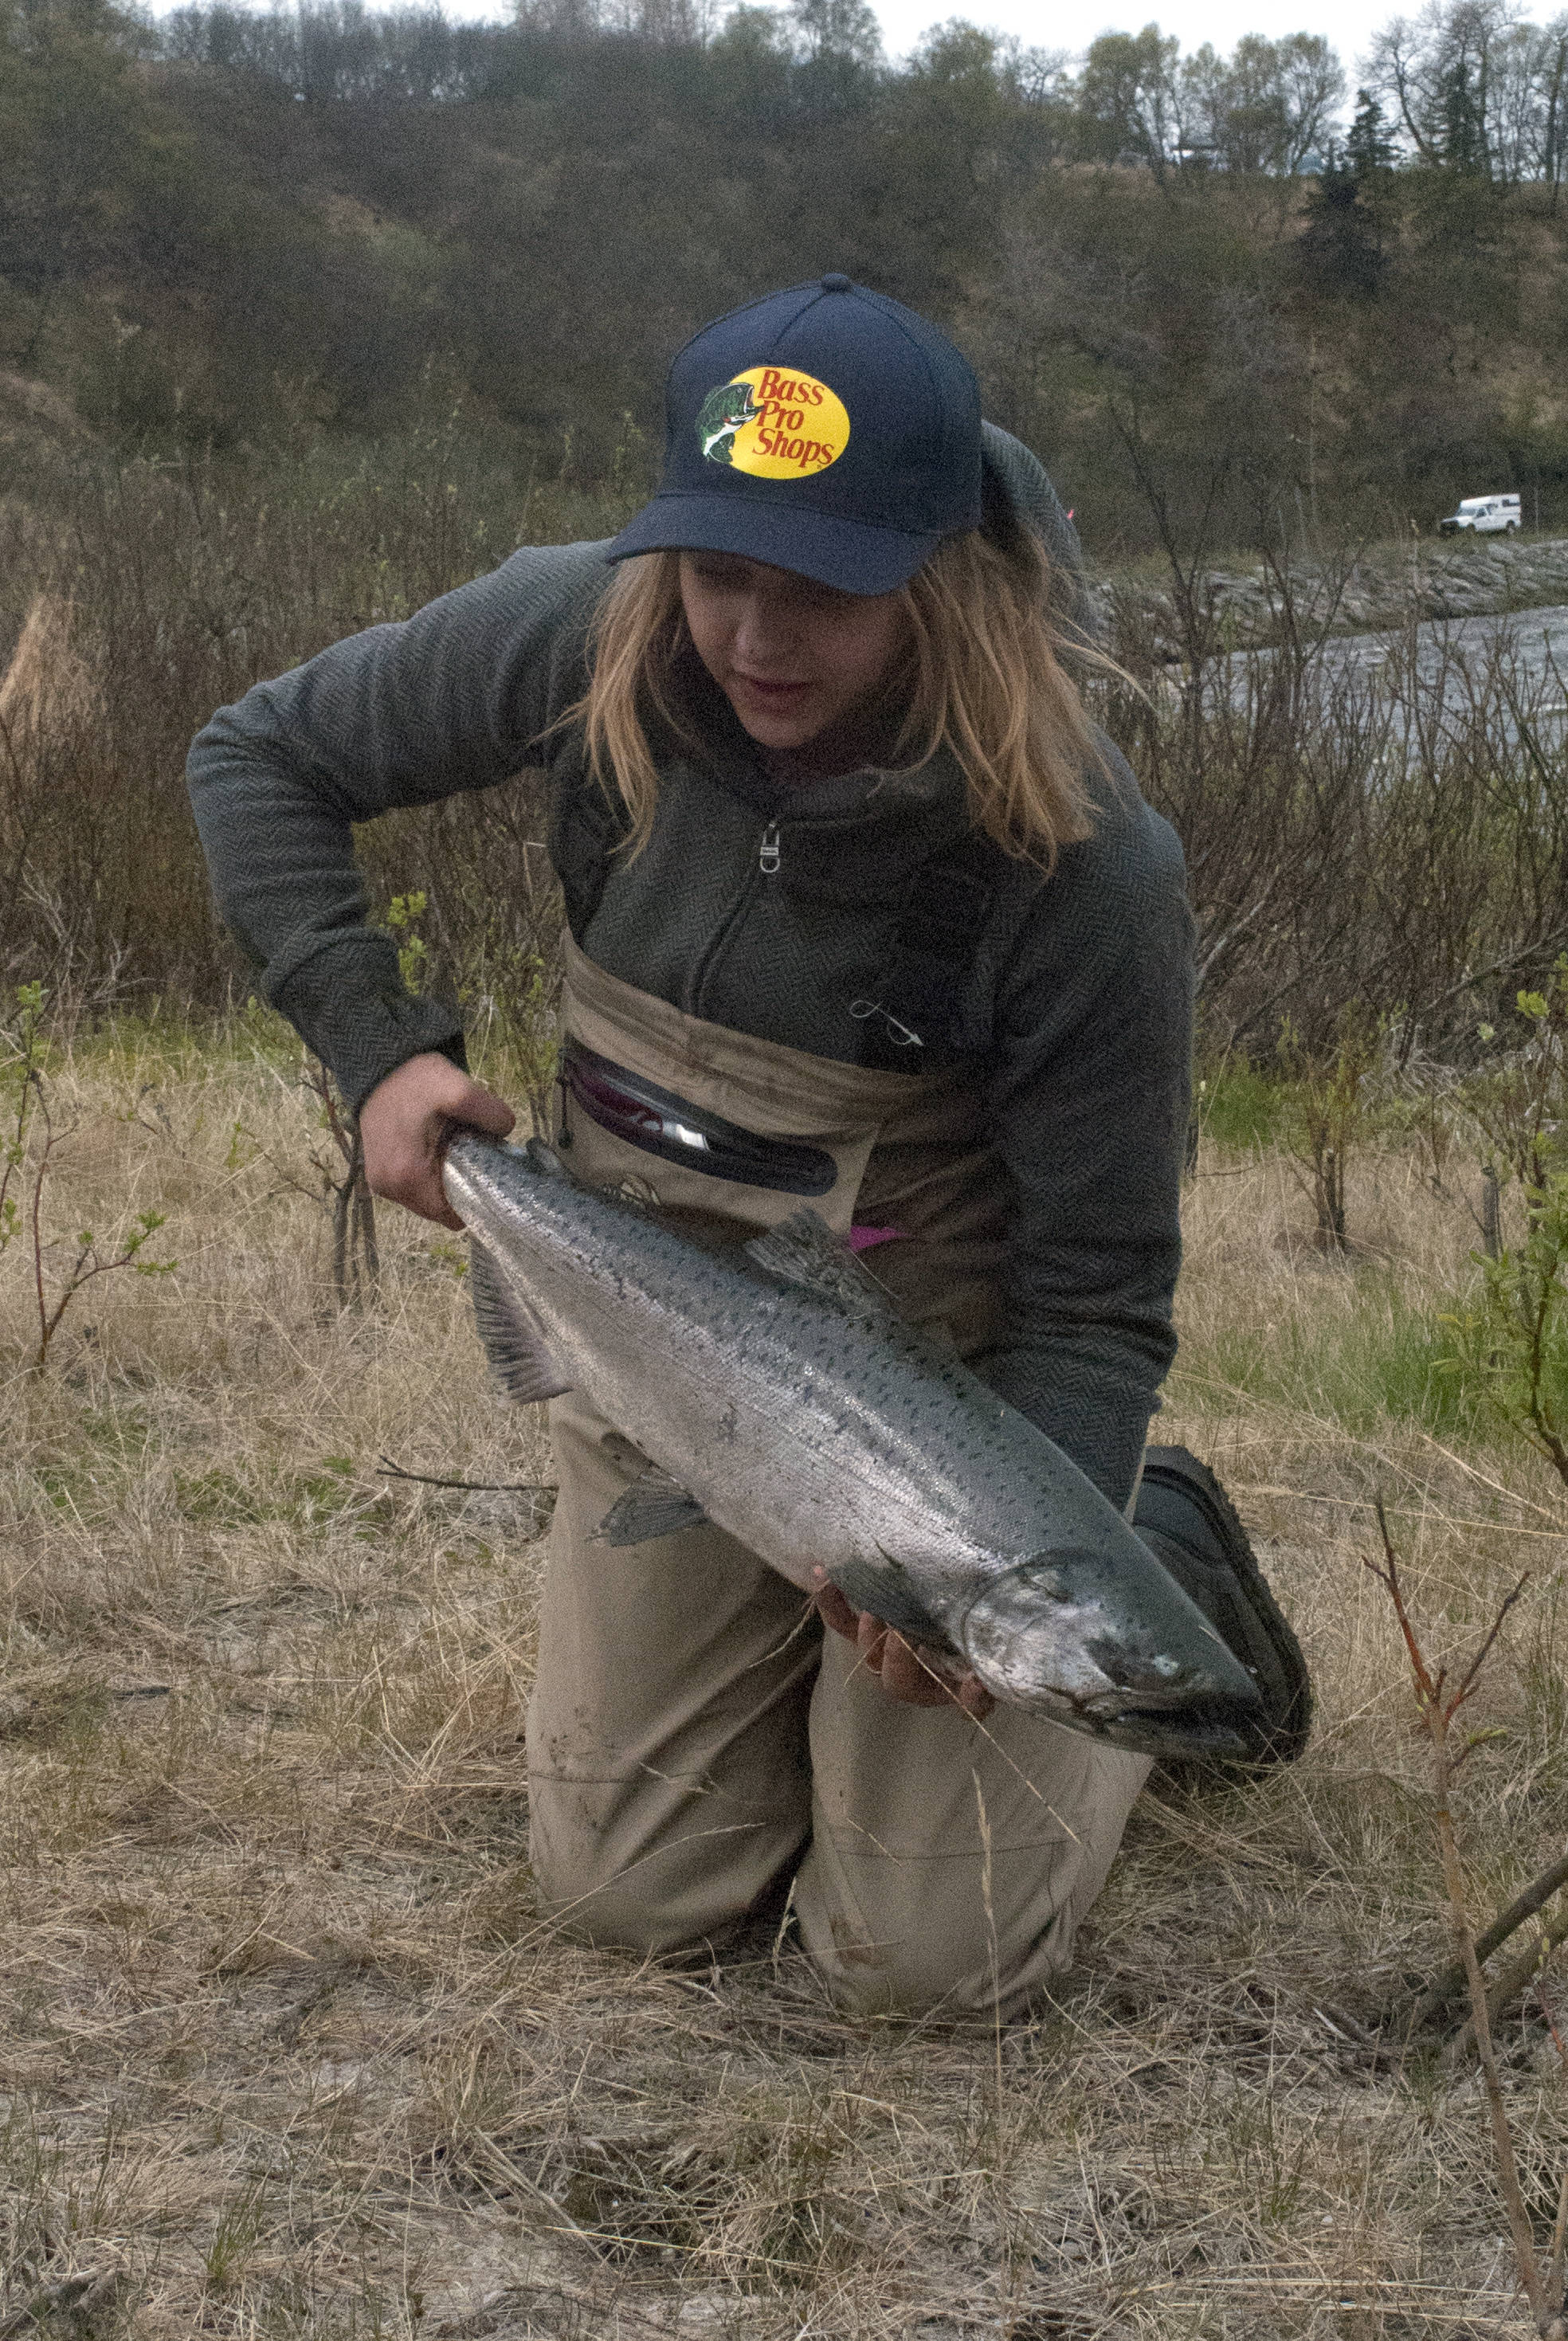 Heather Row of Anchorage prepares to pose for a photo with her freshly caught wild king salmon at the Ninilchik River during the river’s opening weekend on Saturday, May 27 in Ninilchik, Alaska. (Kat Sorensen/Peninsula Clarion)